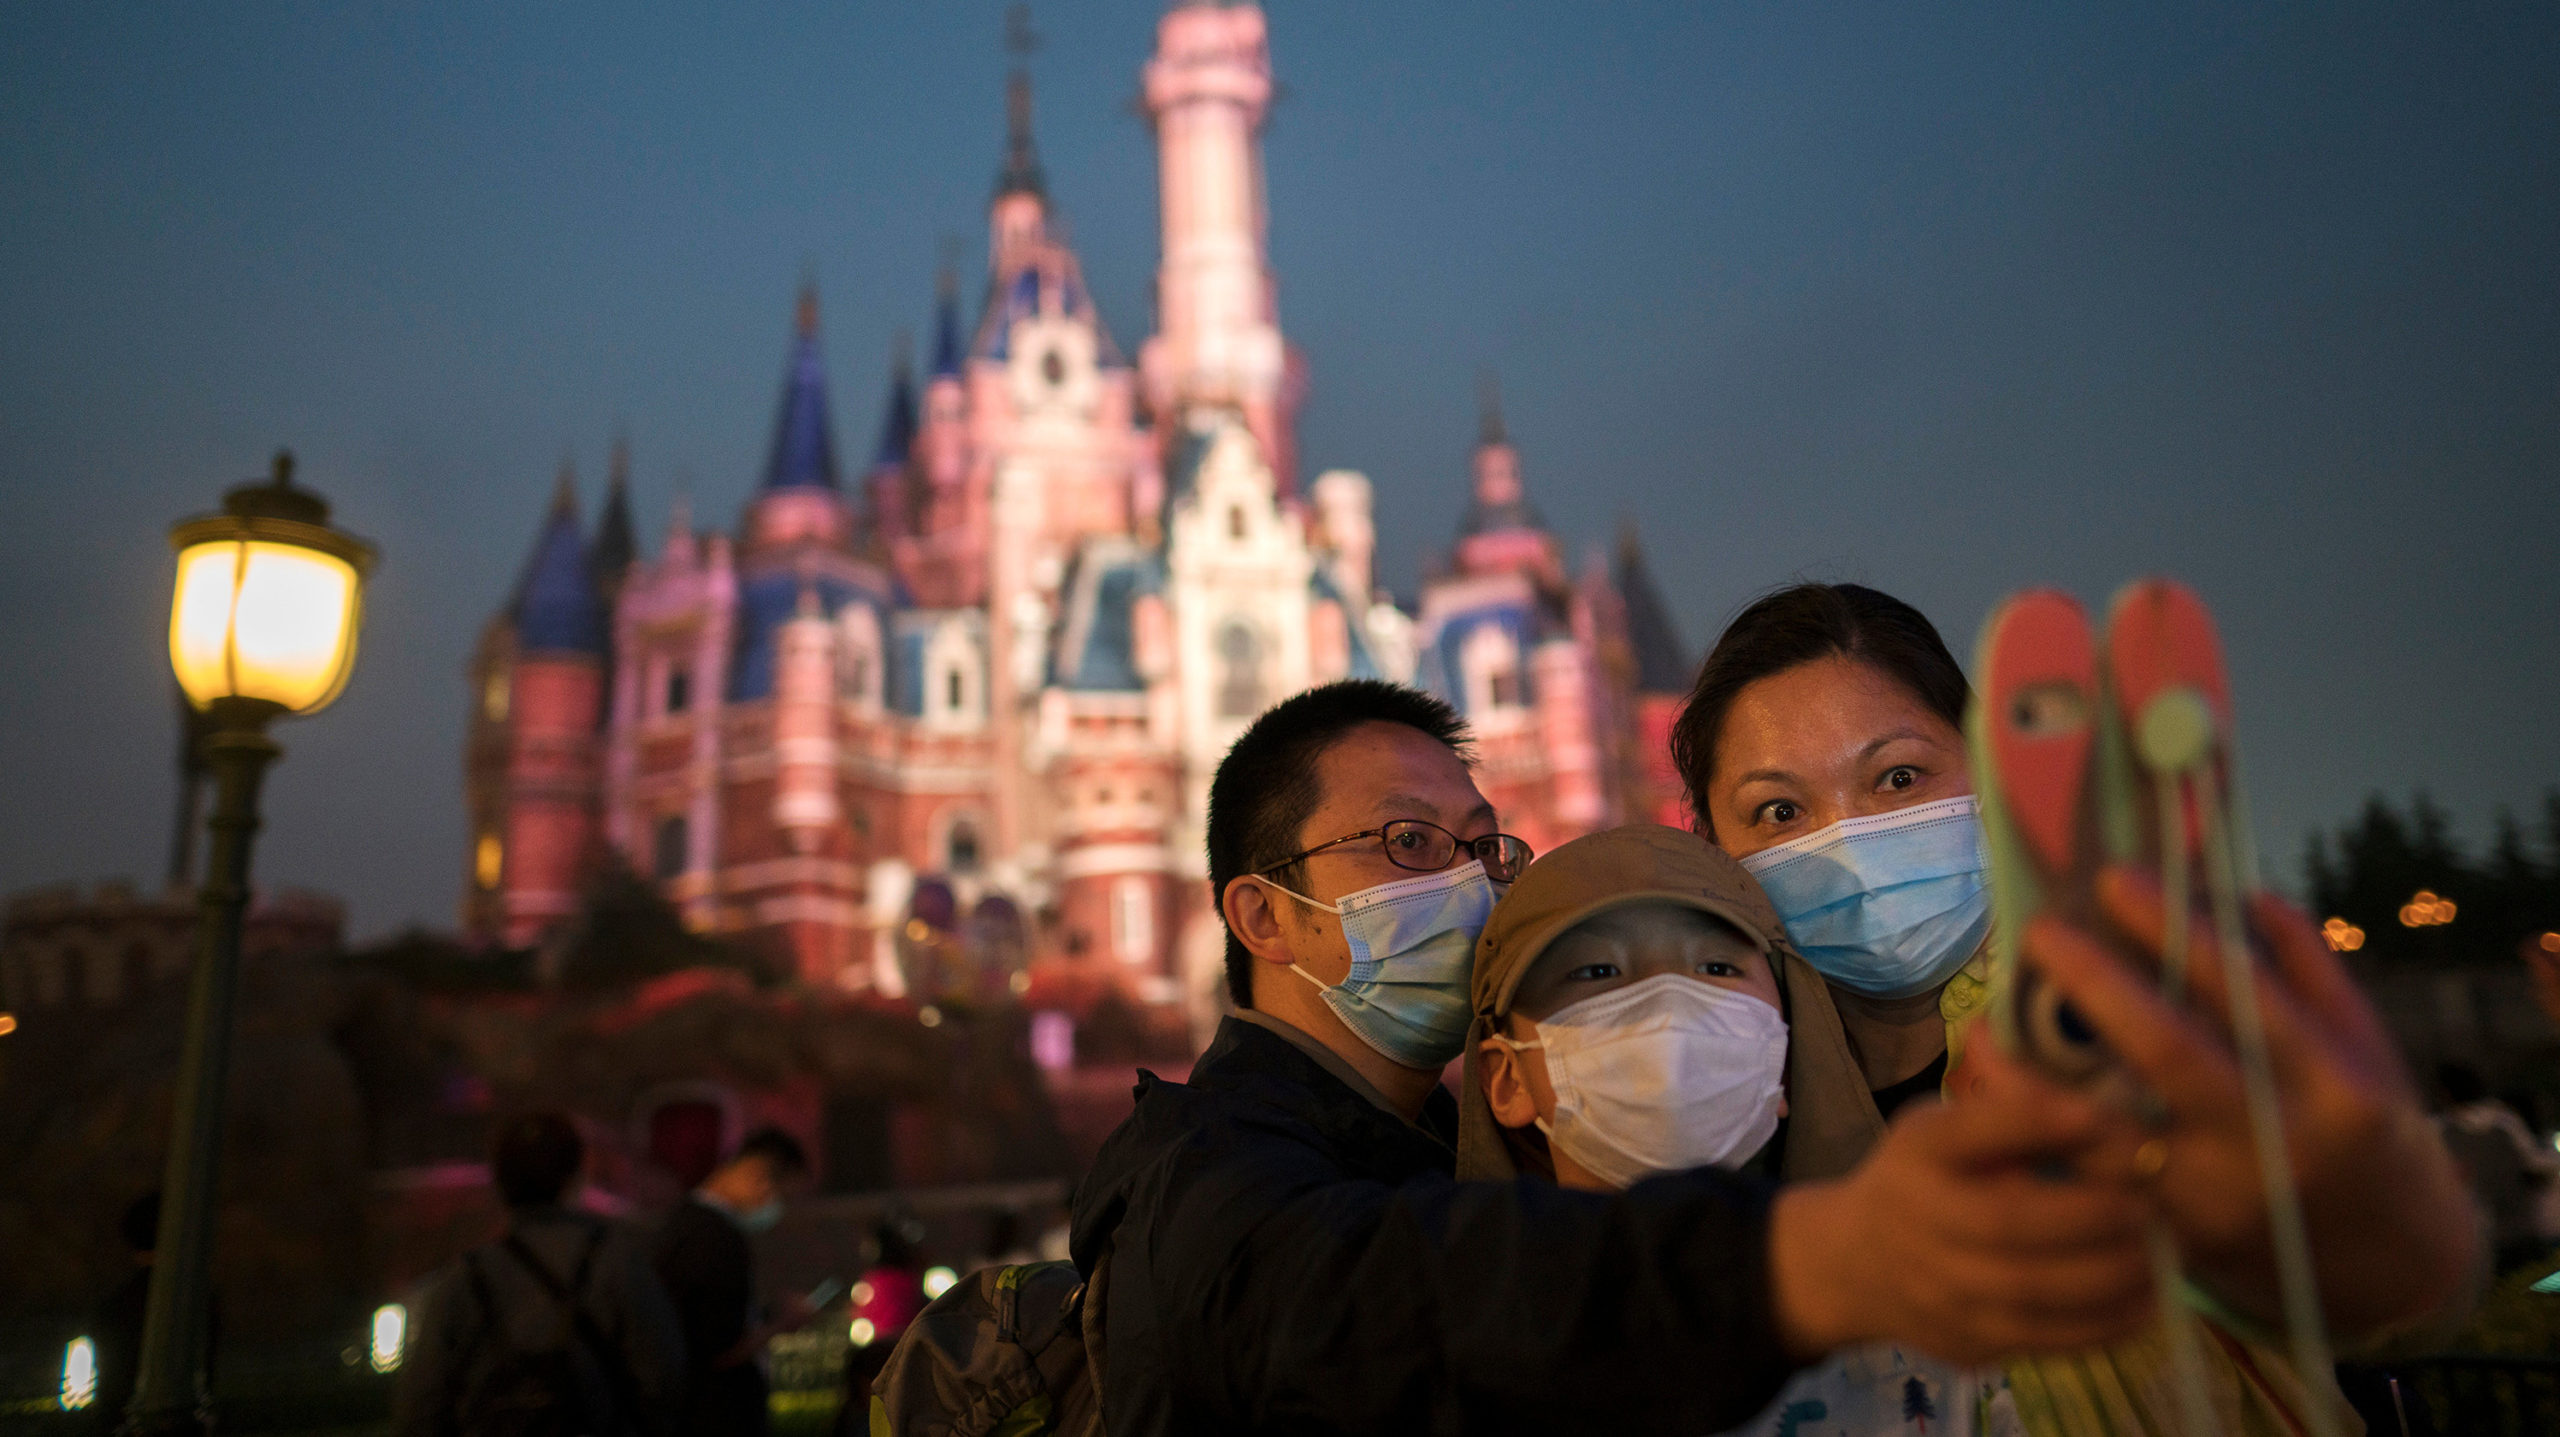 Guests take a photo in Shanghai Disneyland, a park where mask mandates have been largely successful. (Photo: Hu Chengwei , Getty Images)